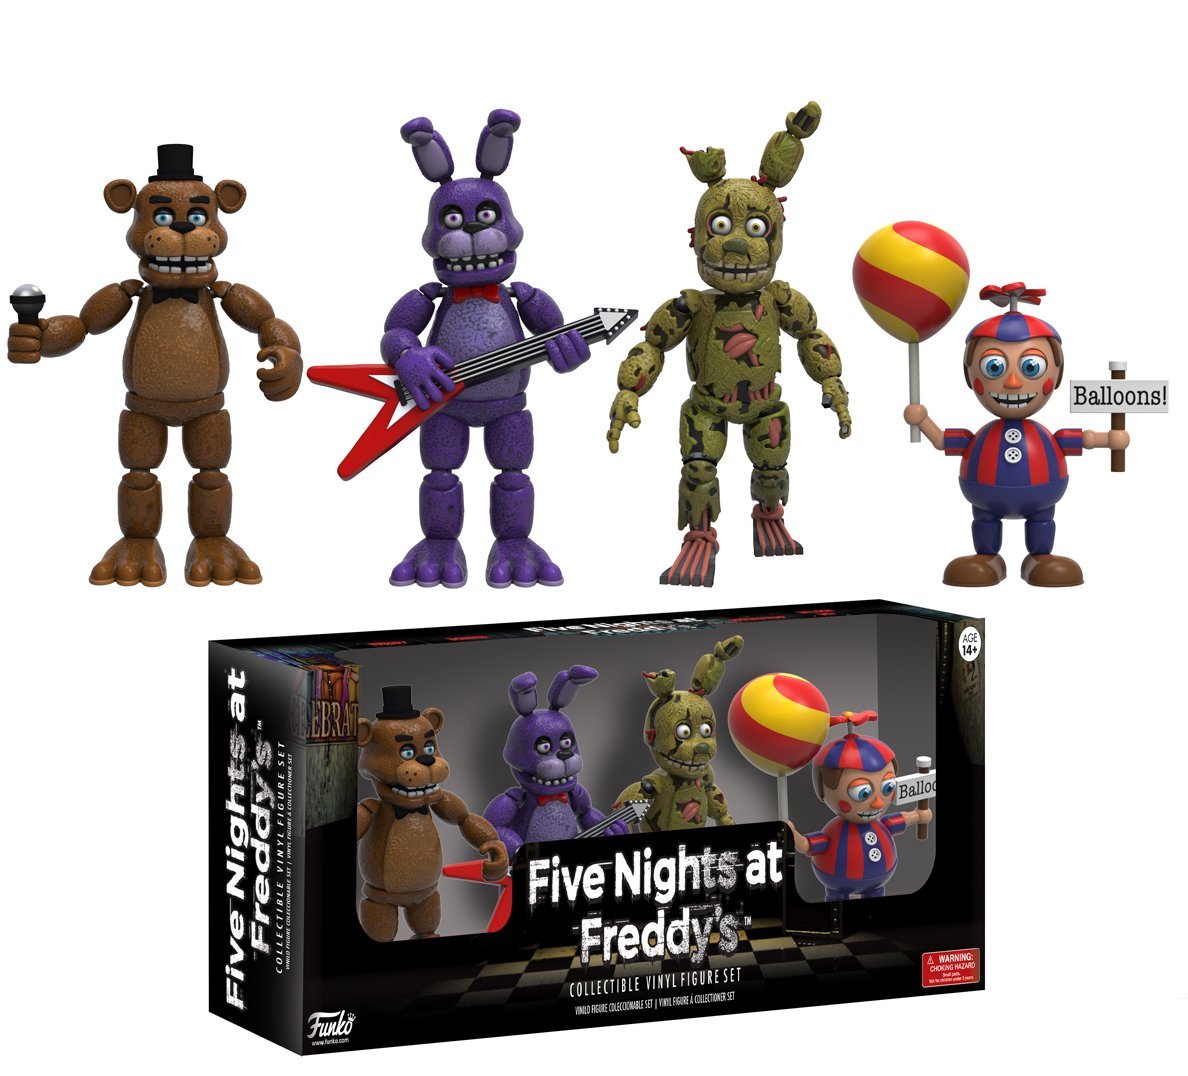 Five Nights at Freddy's フィギュア4体セット その2 - Game Station Online